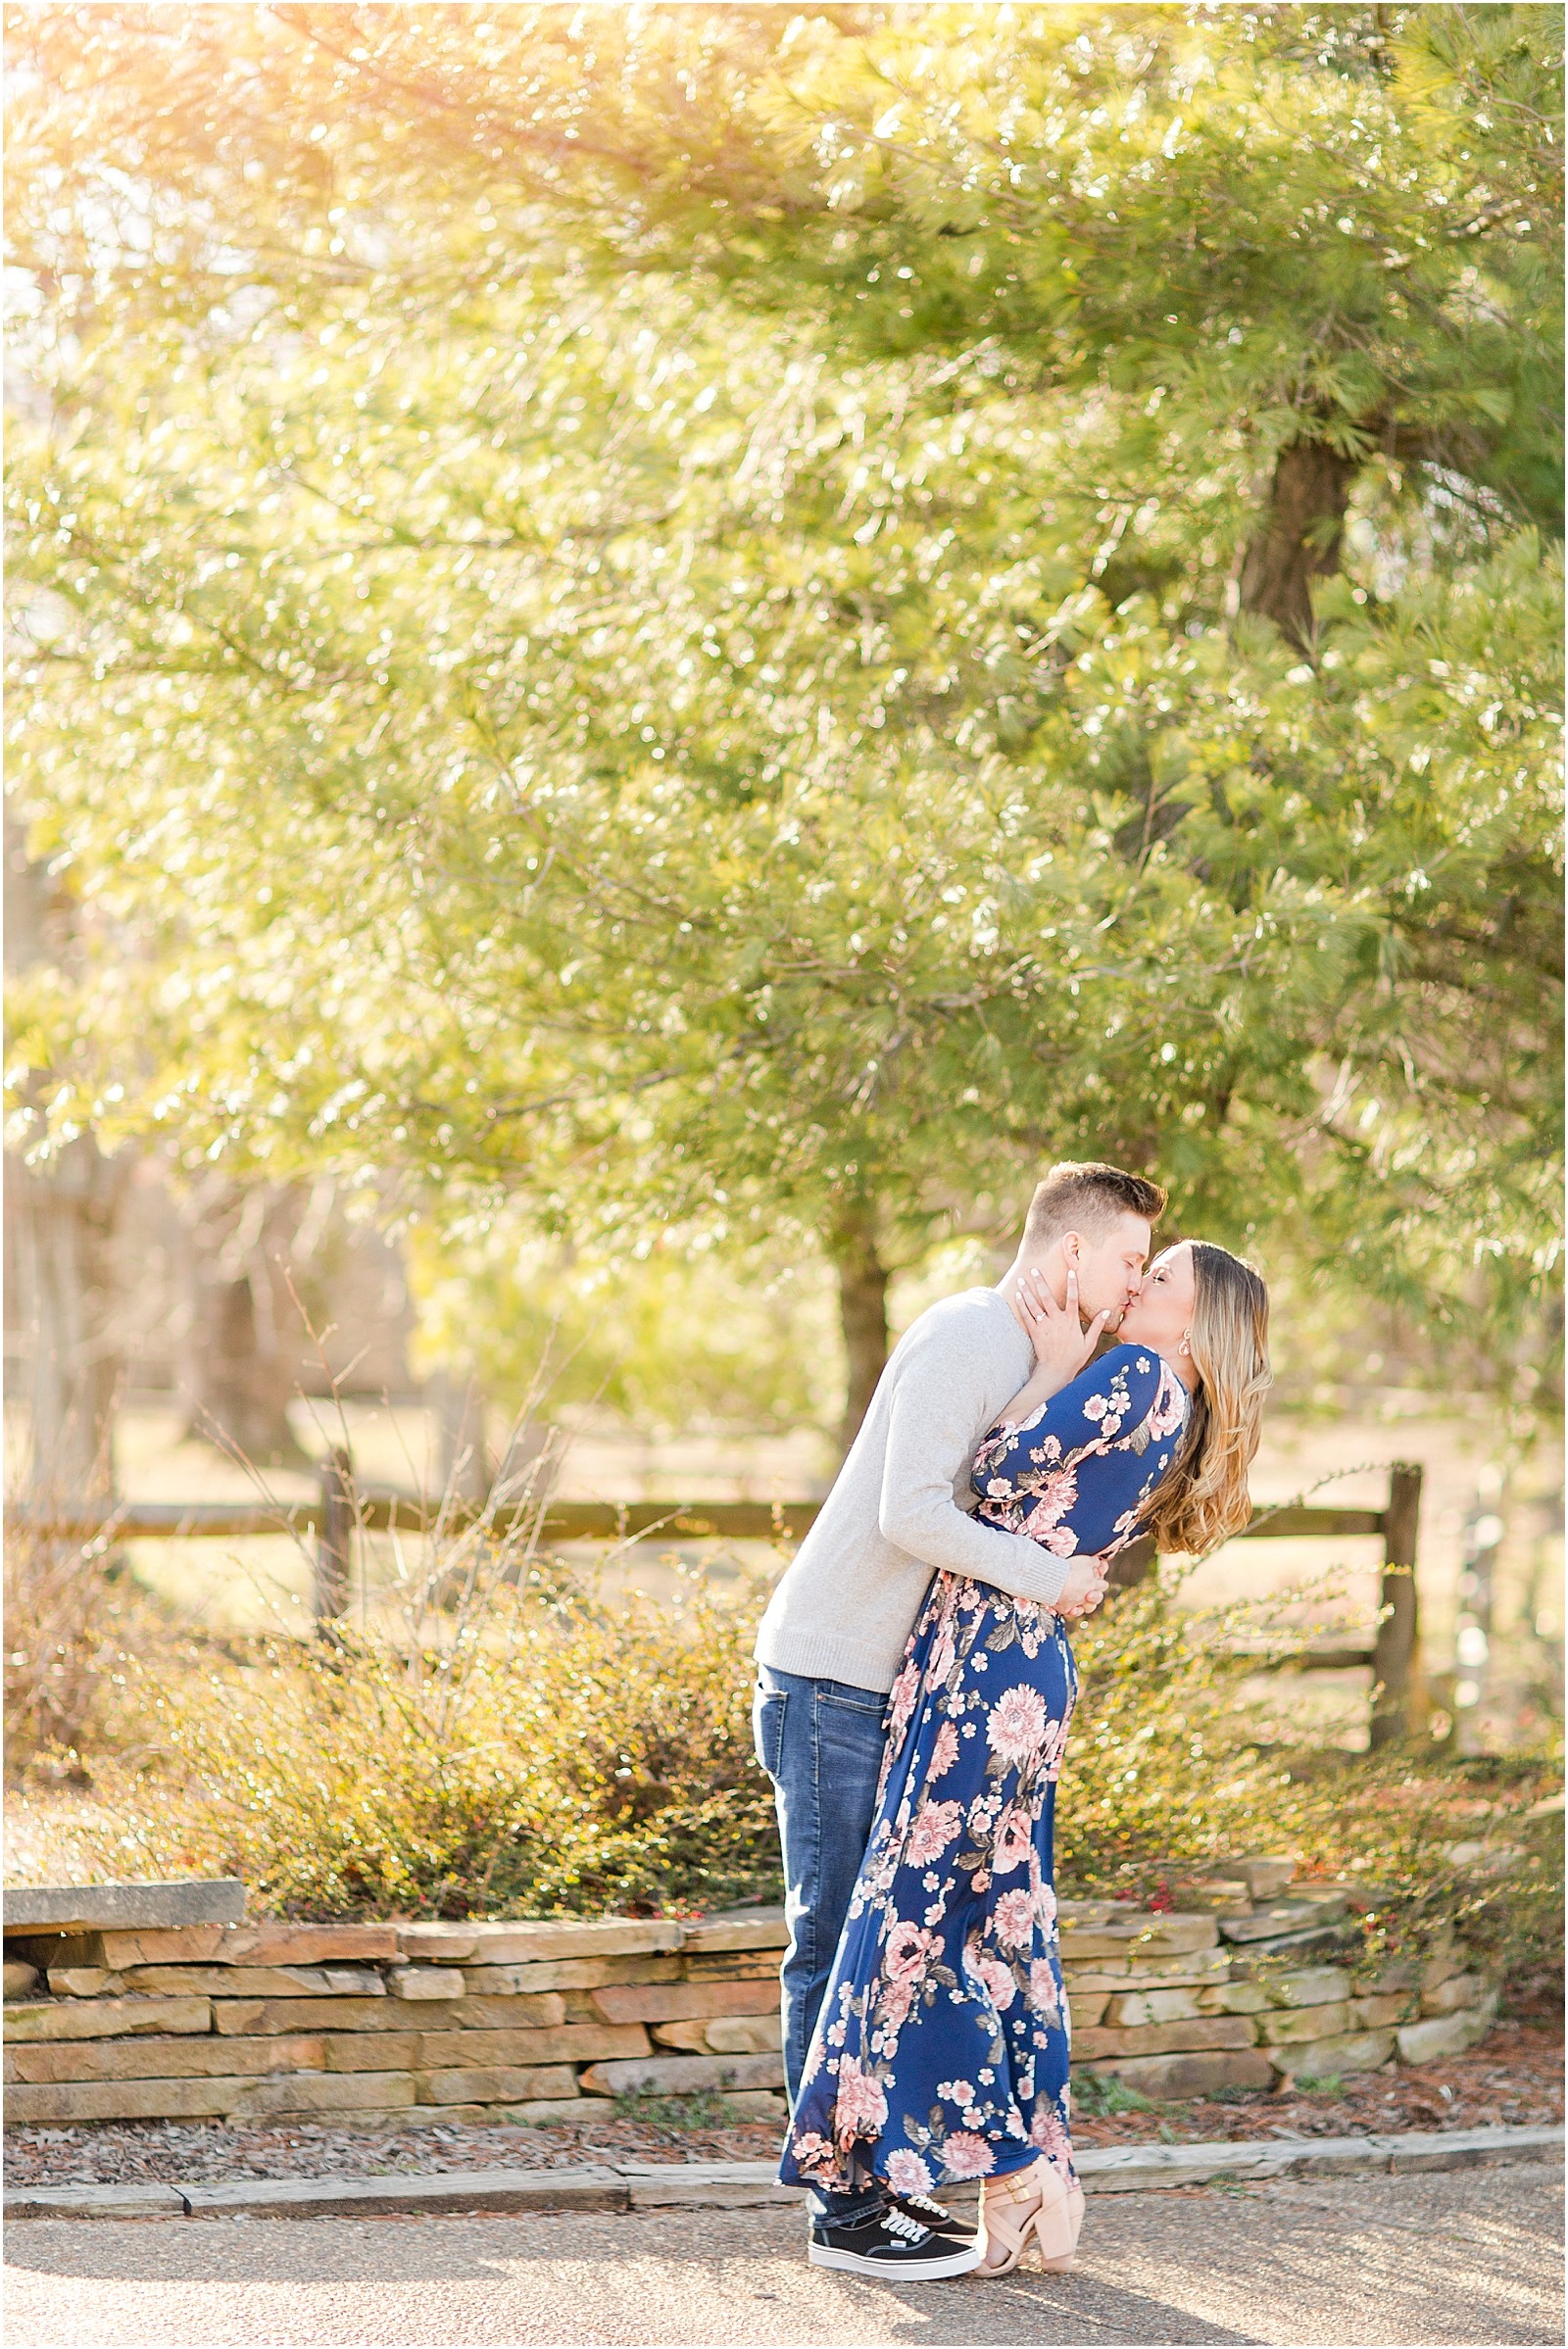 Rachel and Nick | Lincoln State Park Engagement Session 004.jpg